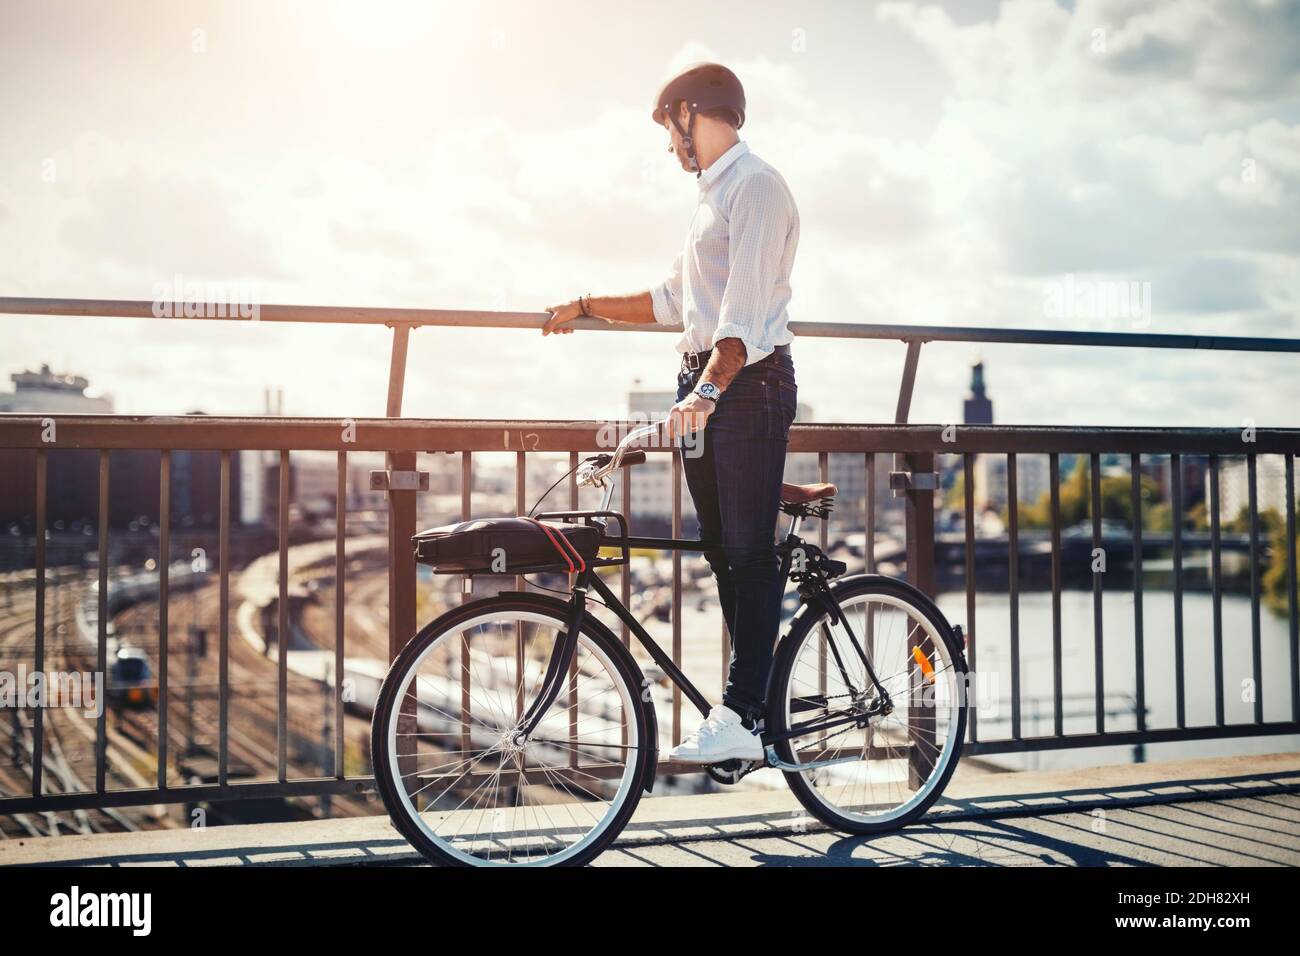 Businessman looking at city view while standing on bicycle Stock Photo